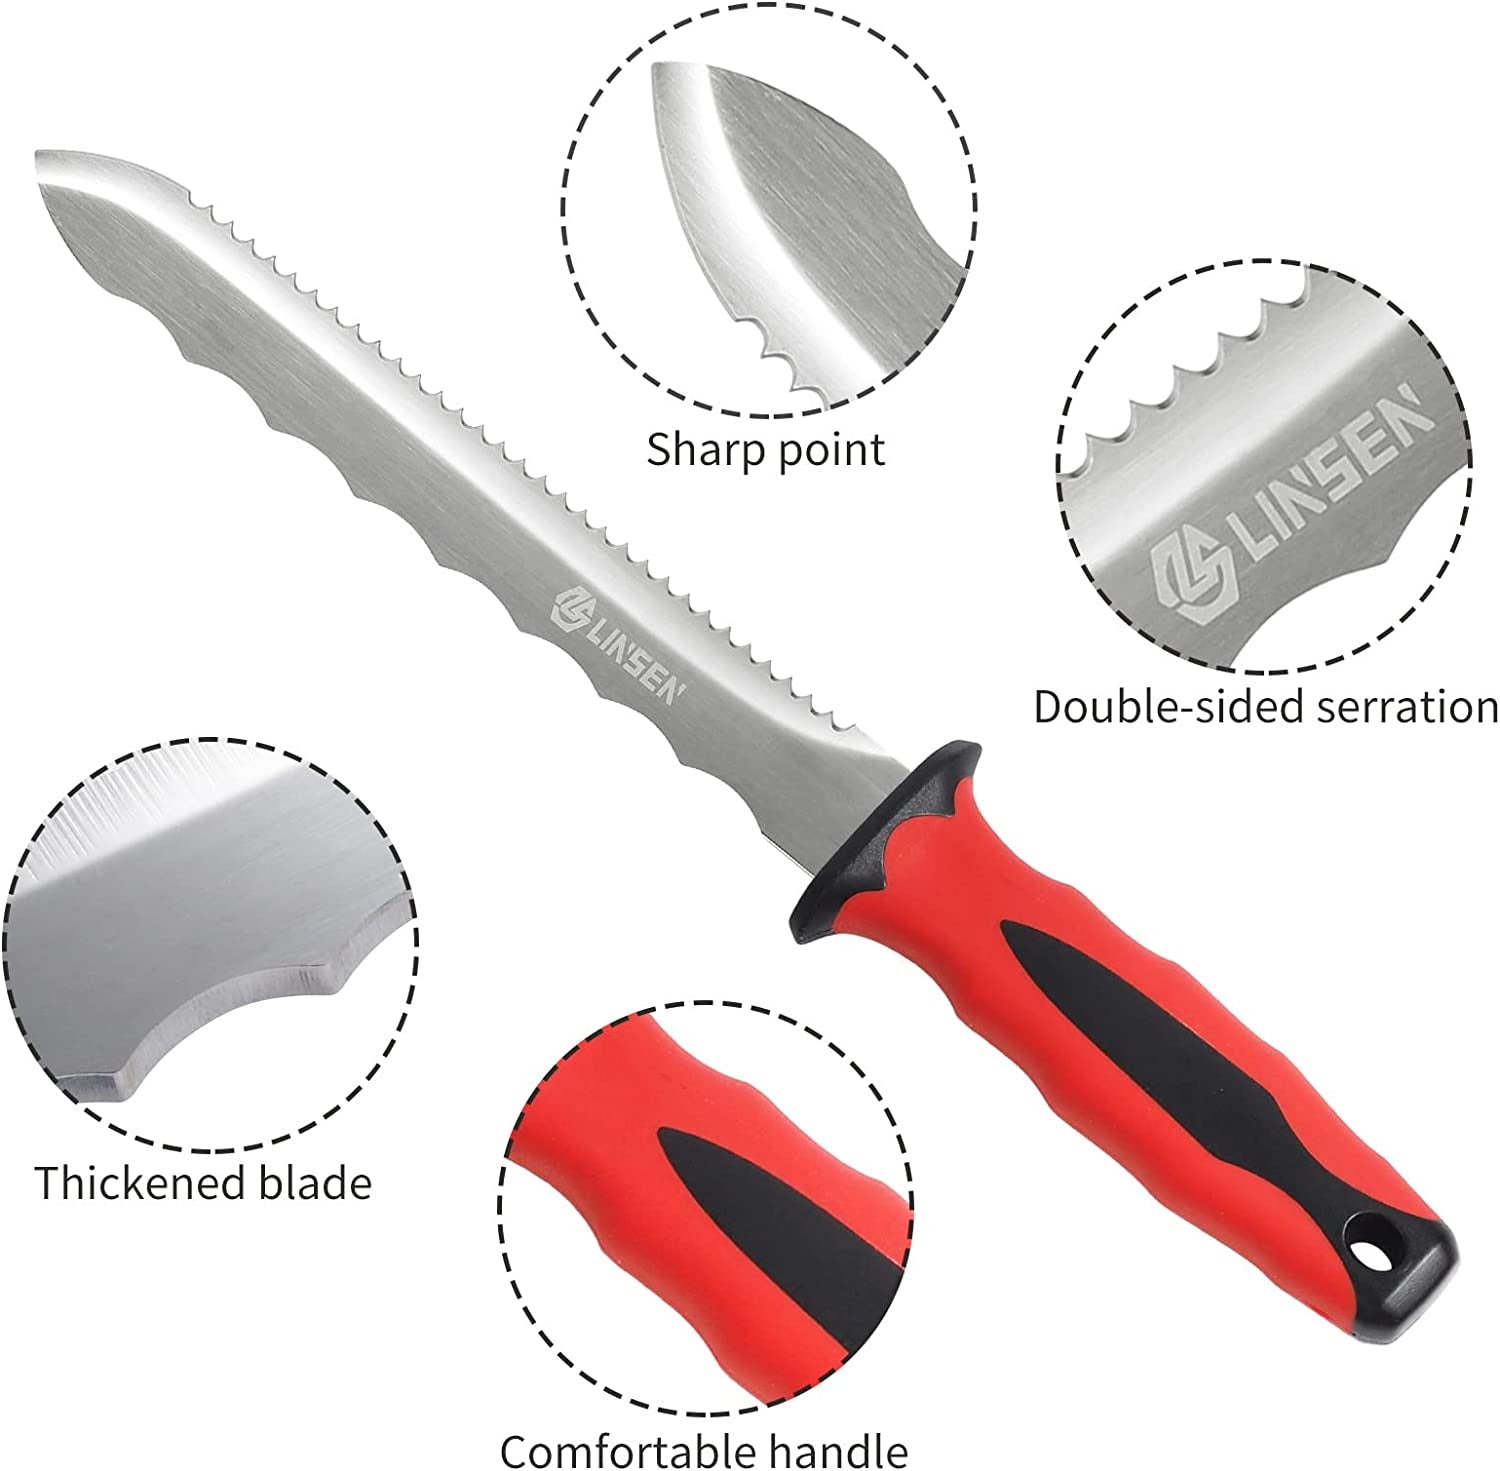 Linsen-outdoor, Linsen-Outdoor Stainless Steel Garden Knife with 7.8" Blade and Red Handle, Double Side Utility Sod Cutter Lawn Repair Garden Knife with Nylon Sheath